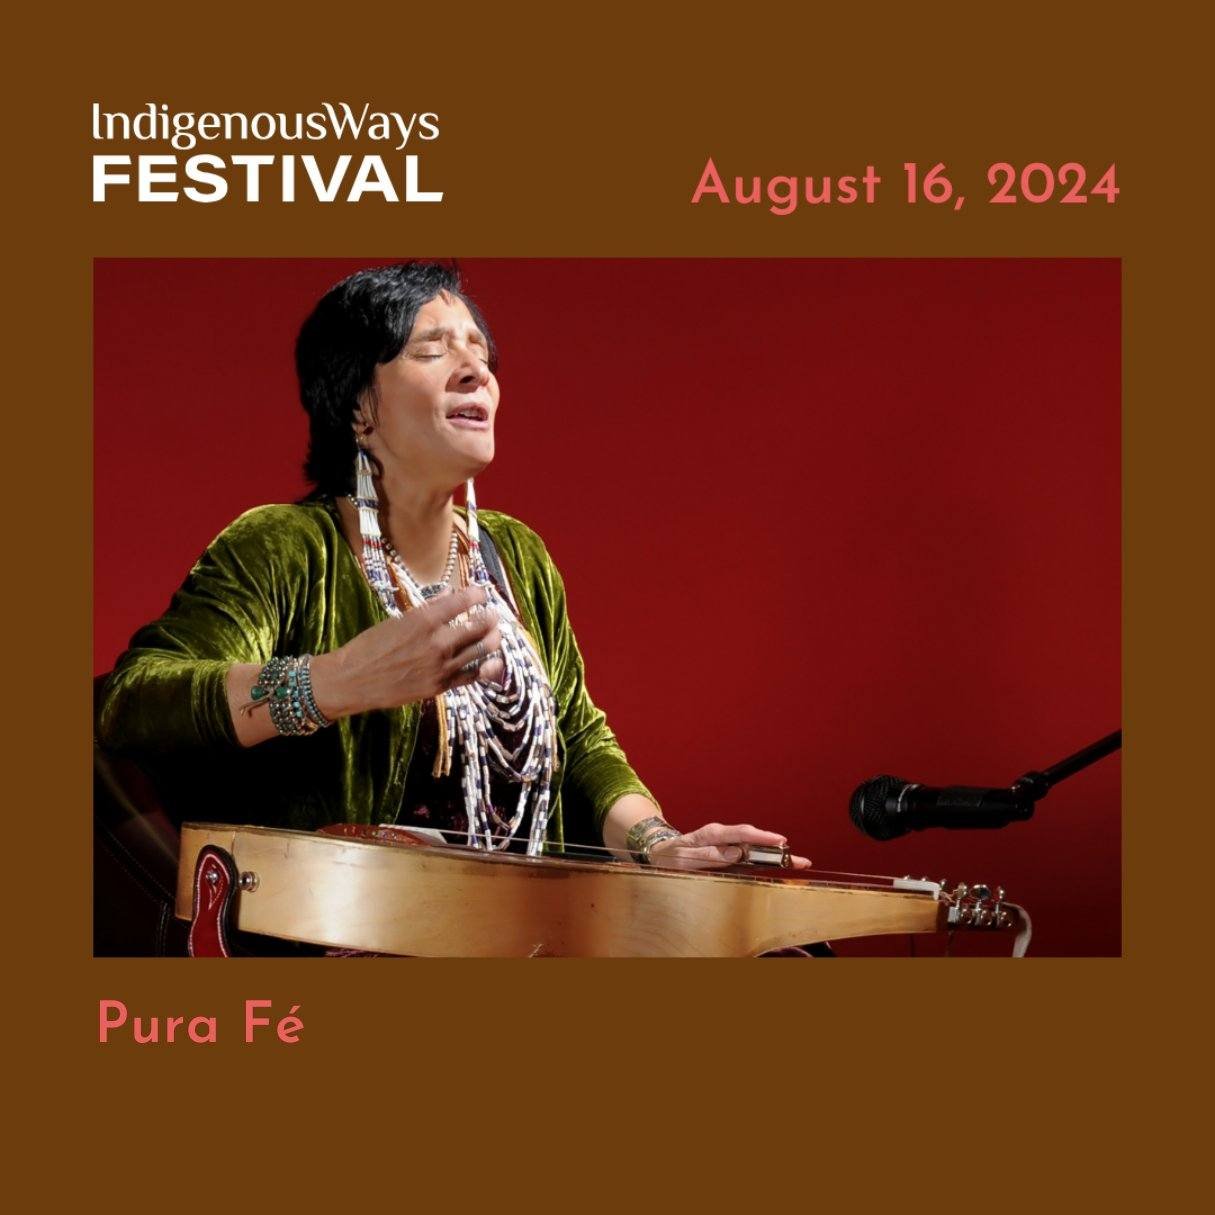 Get ready to let the music of @pura._fe take you away this August 16th! 

Pura F&eacute;, hailing from the #Tuscarora and #Taino Nations, is the founder of the women's a cappella group #Ulali.

Pura F&eacute;&rsquo;s incredible storytelling and activ